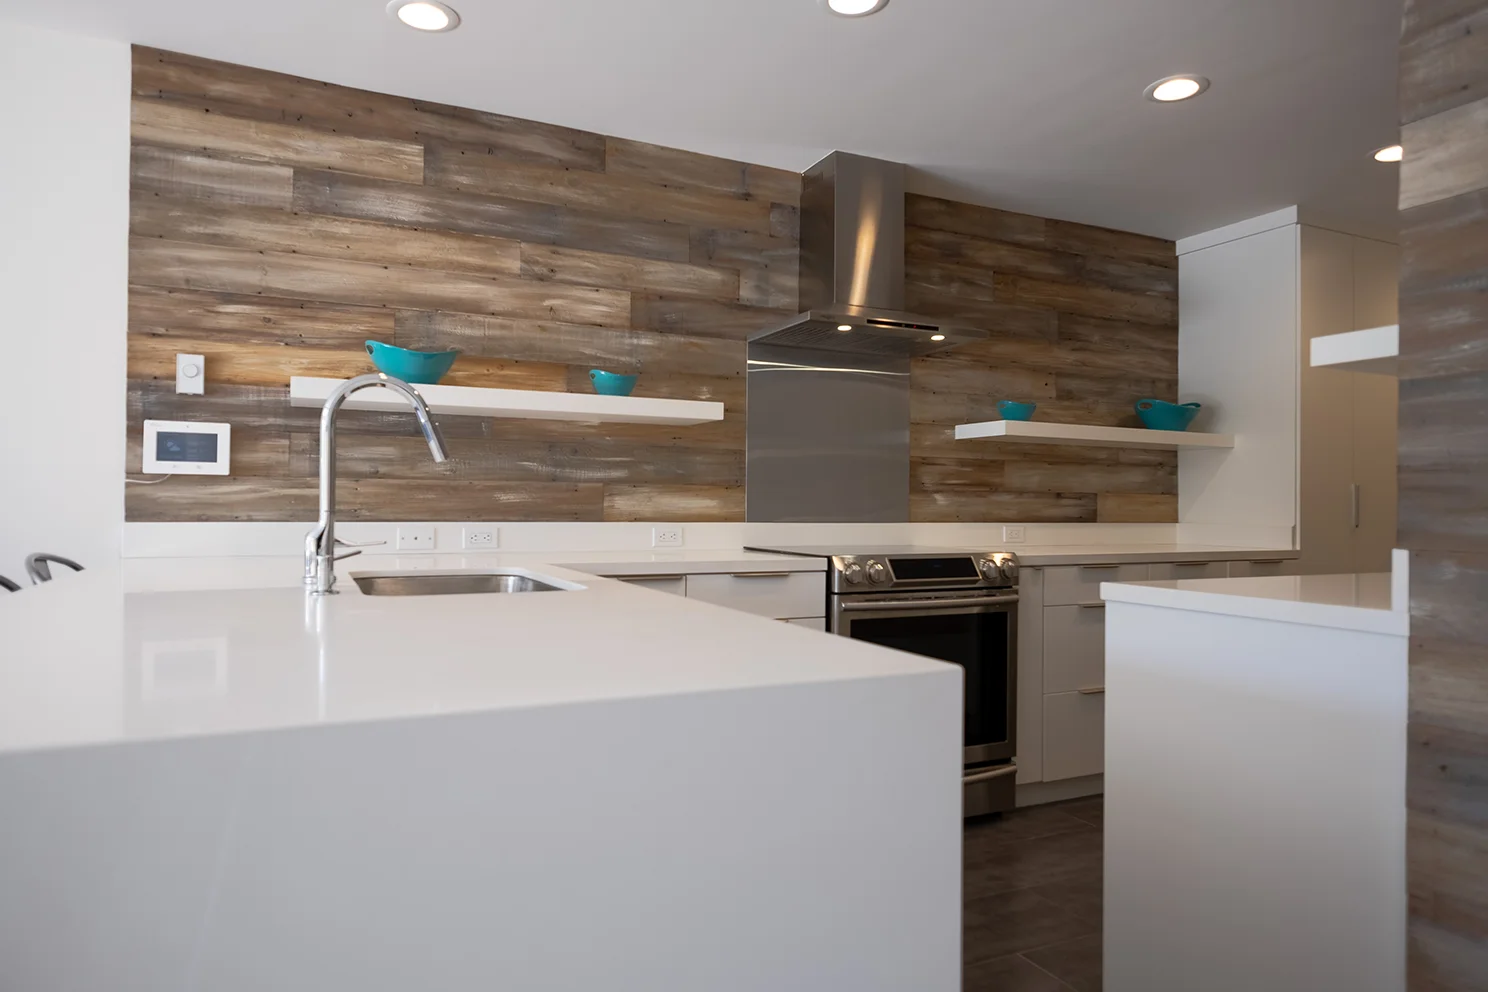 New kitchen featuring breakfast bar with quartz waterfall counter and recycled redwood full height backsplash creates a contemporary rustic feel.